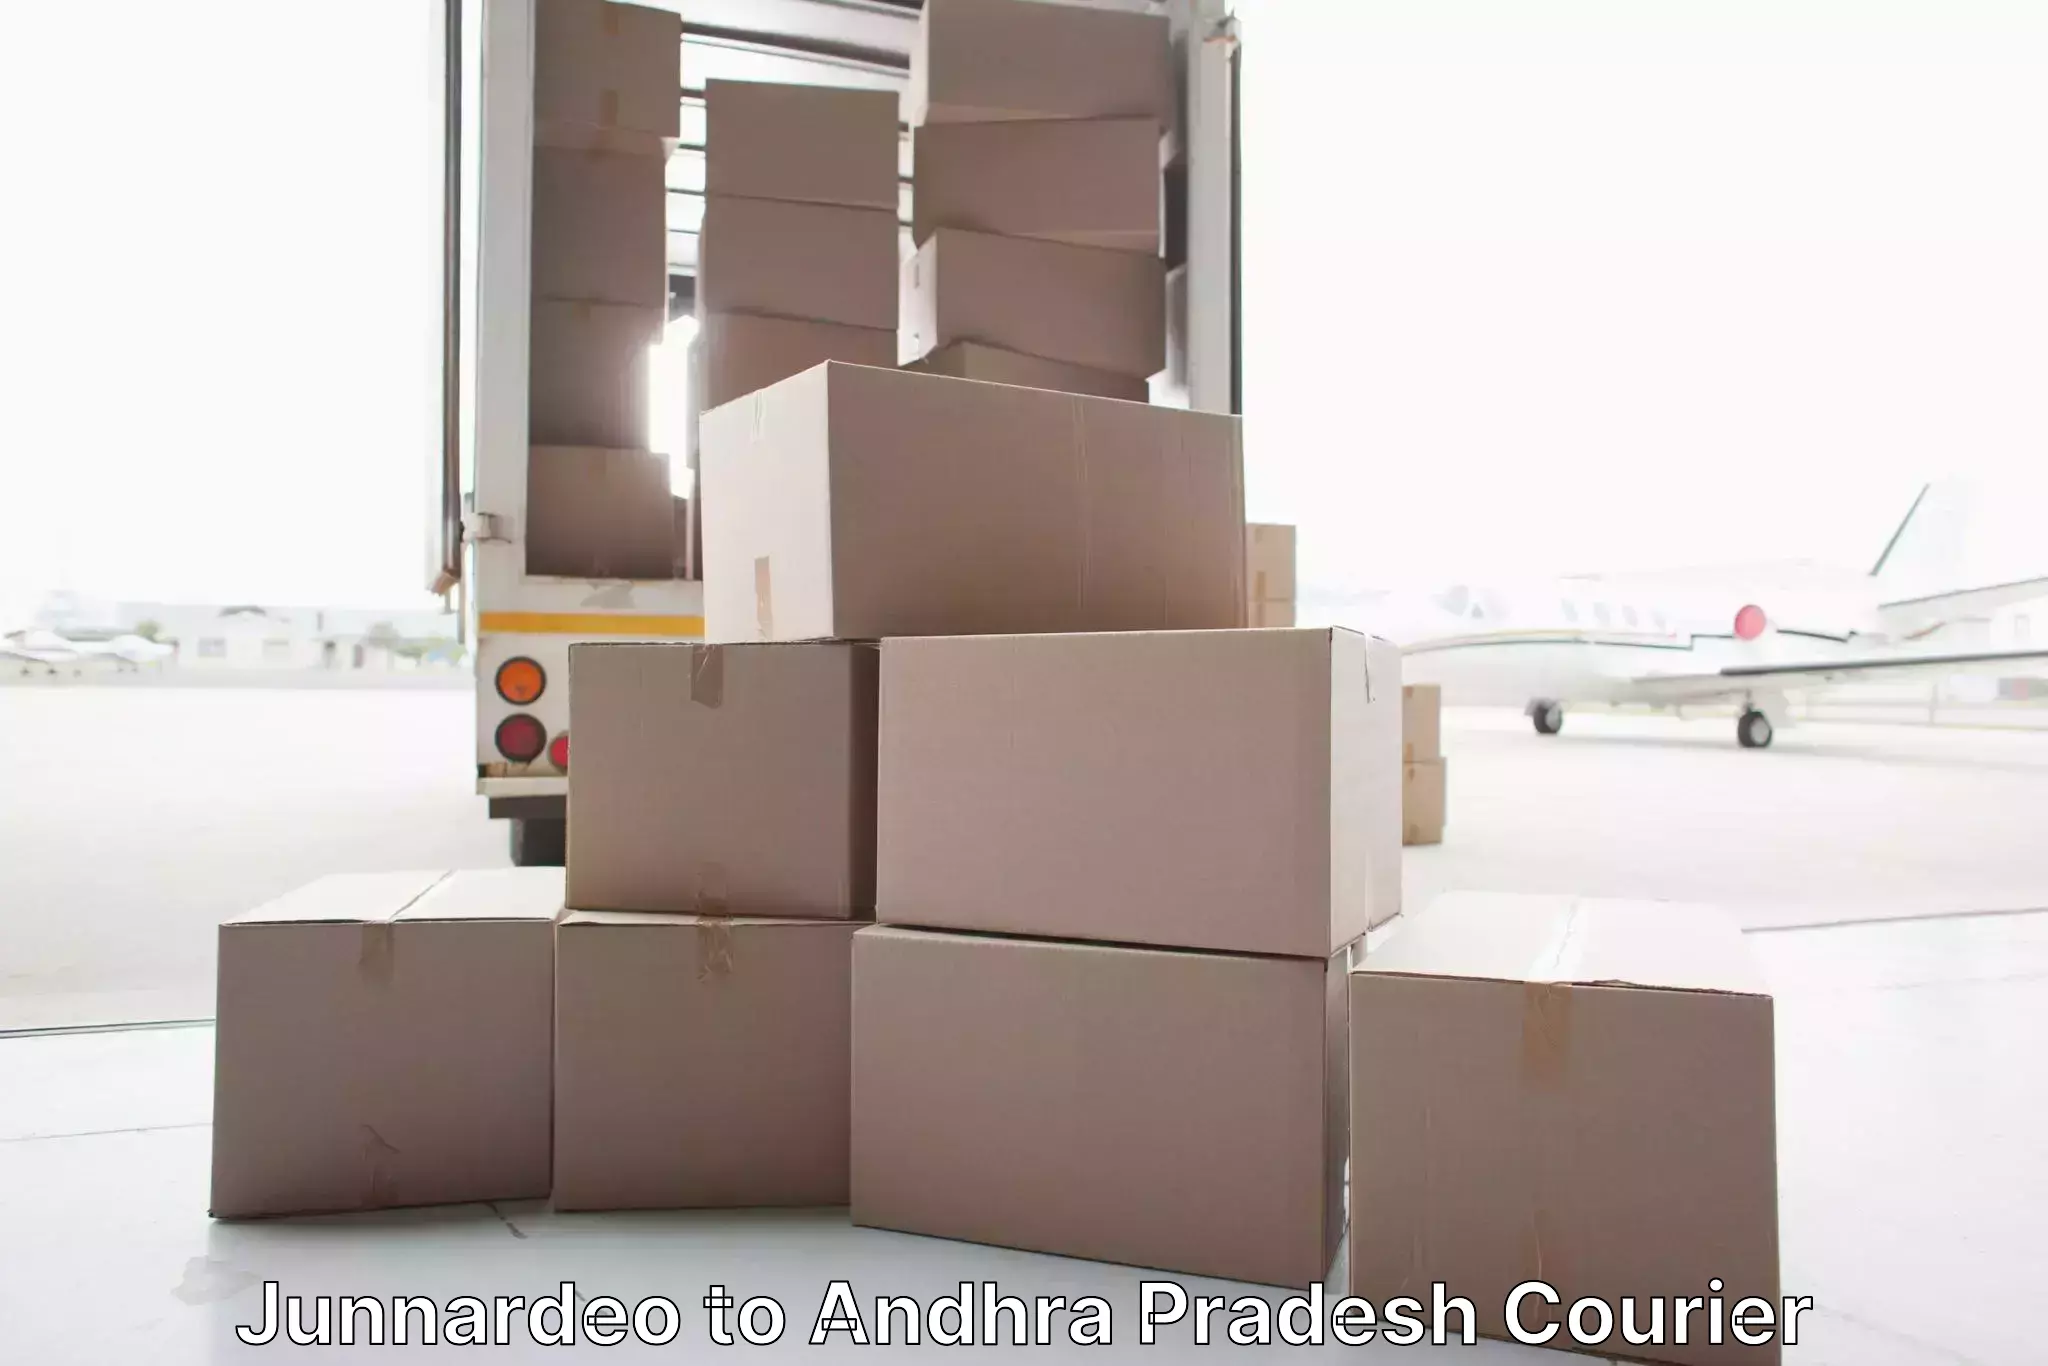 Household moving experts Junnardeo to Visakhapatnam Port